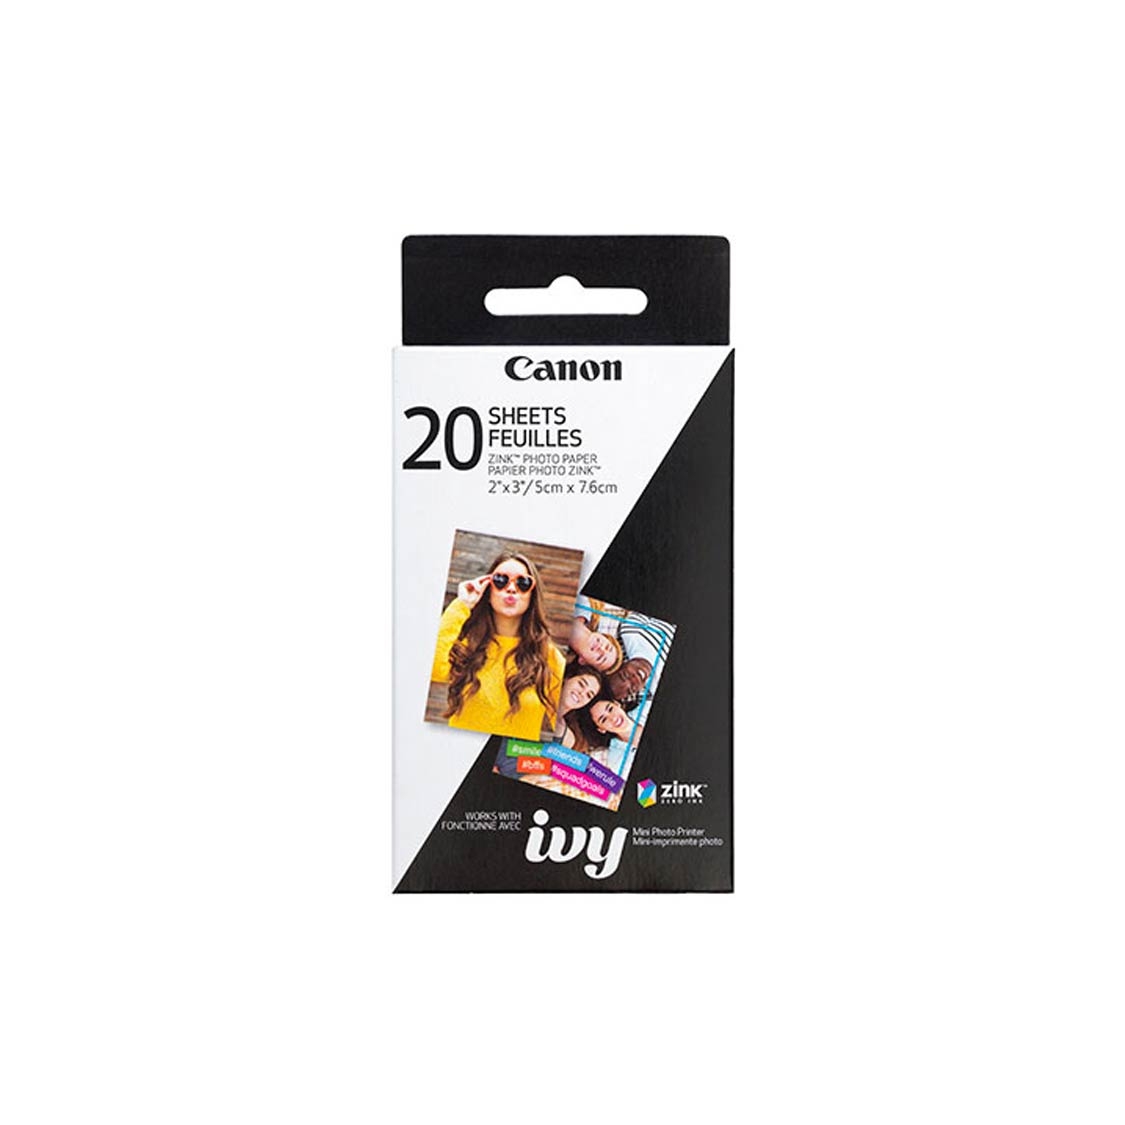 Canon ZINK 2x3 Paper (20 pack)